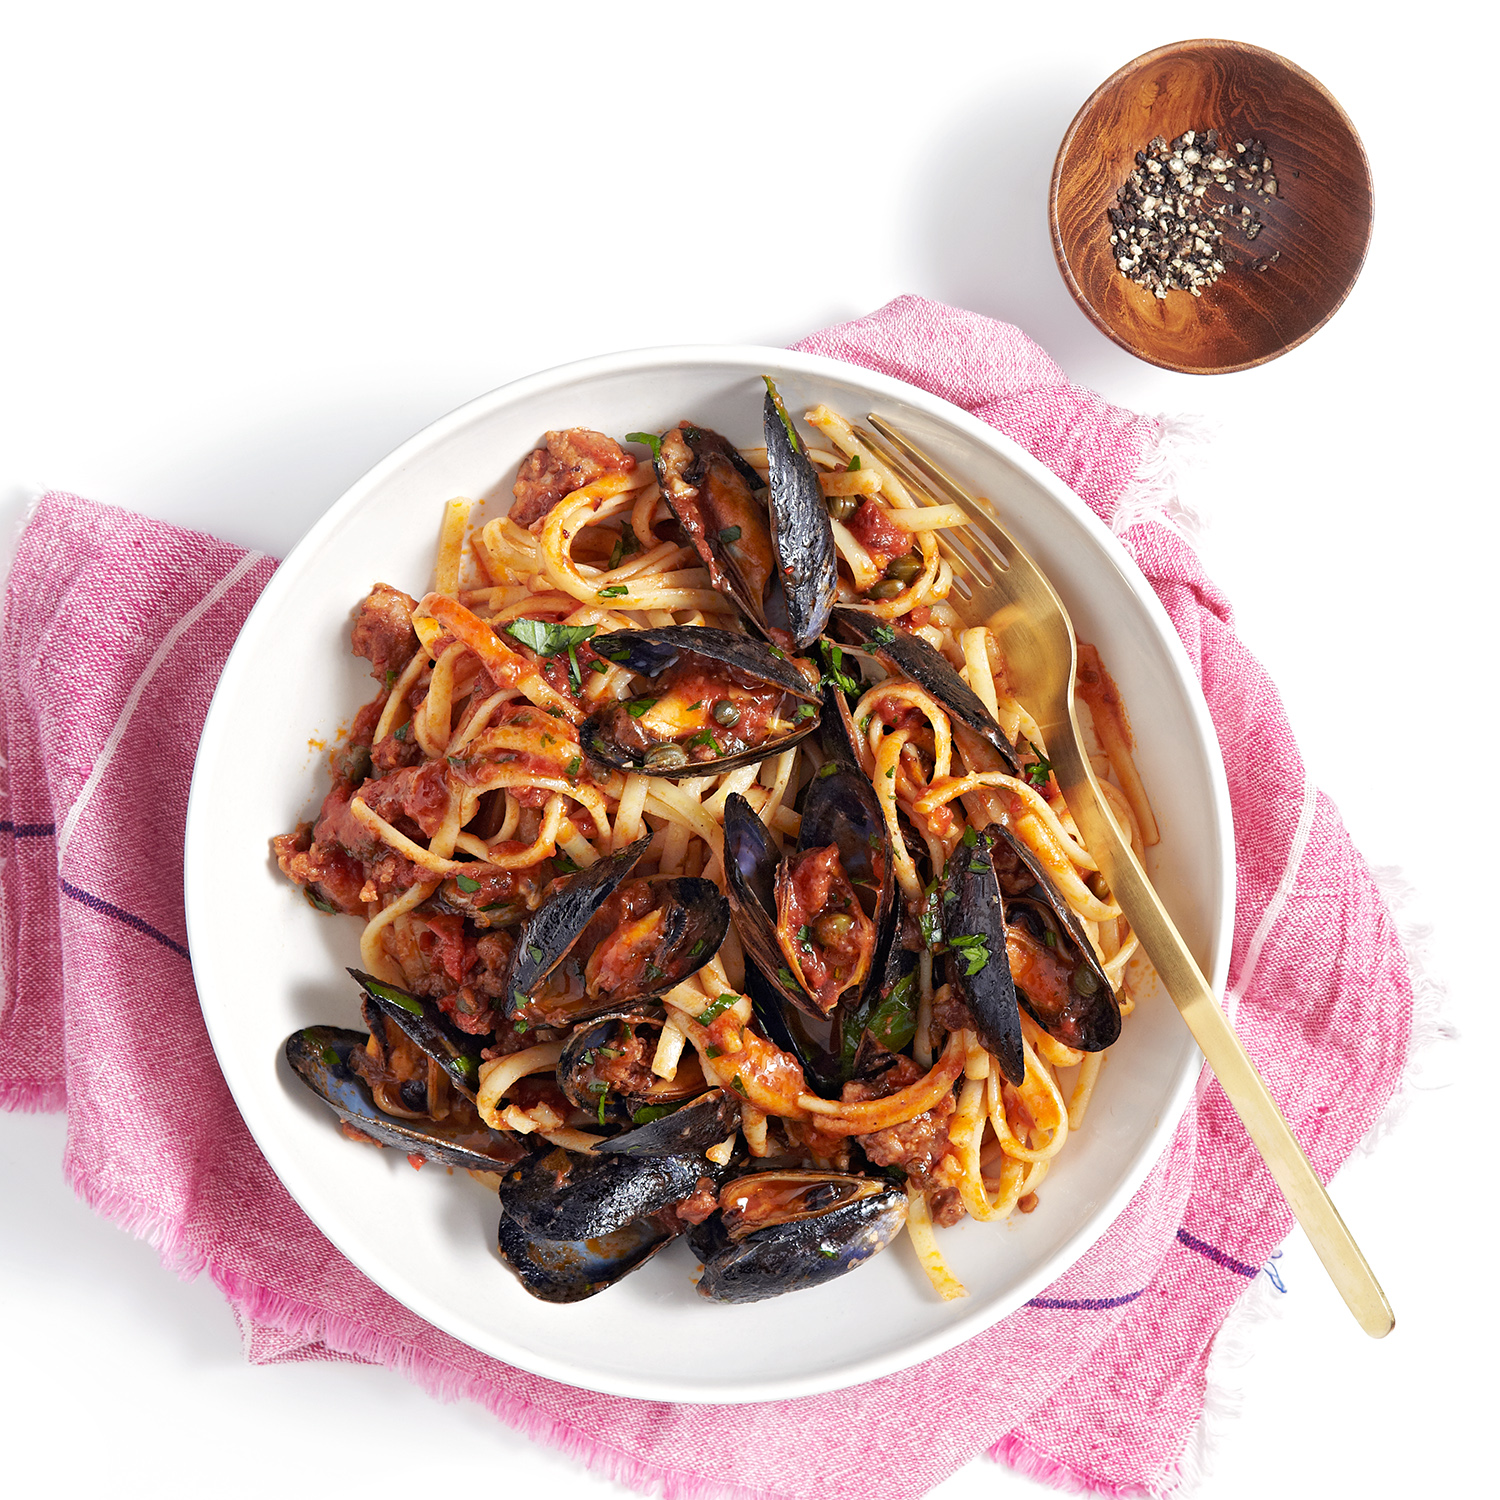 Linguine and Mussels alla Diavola